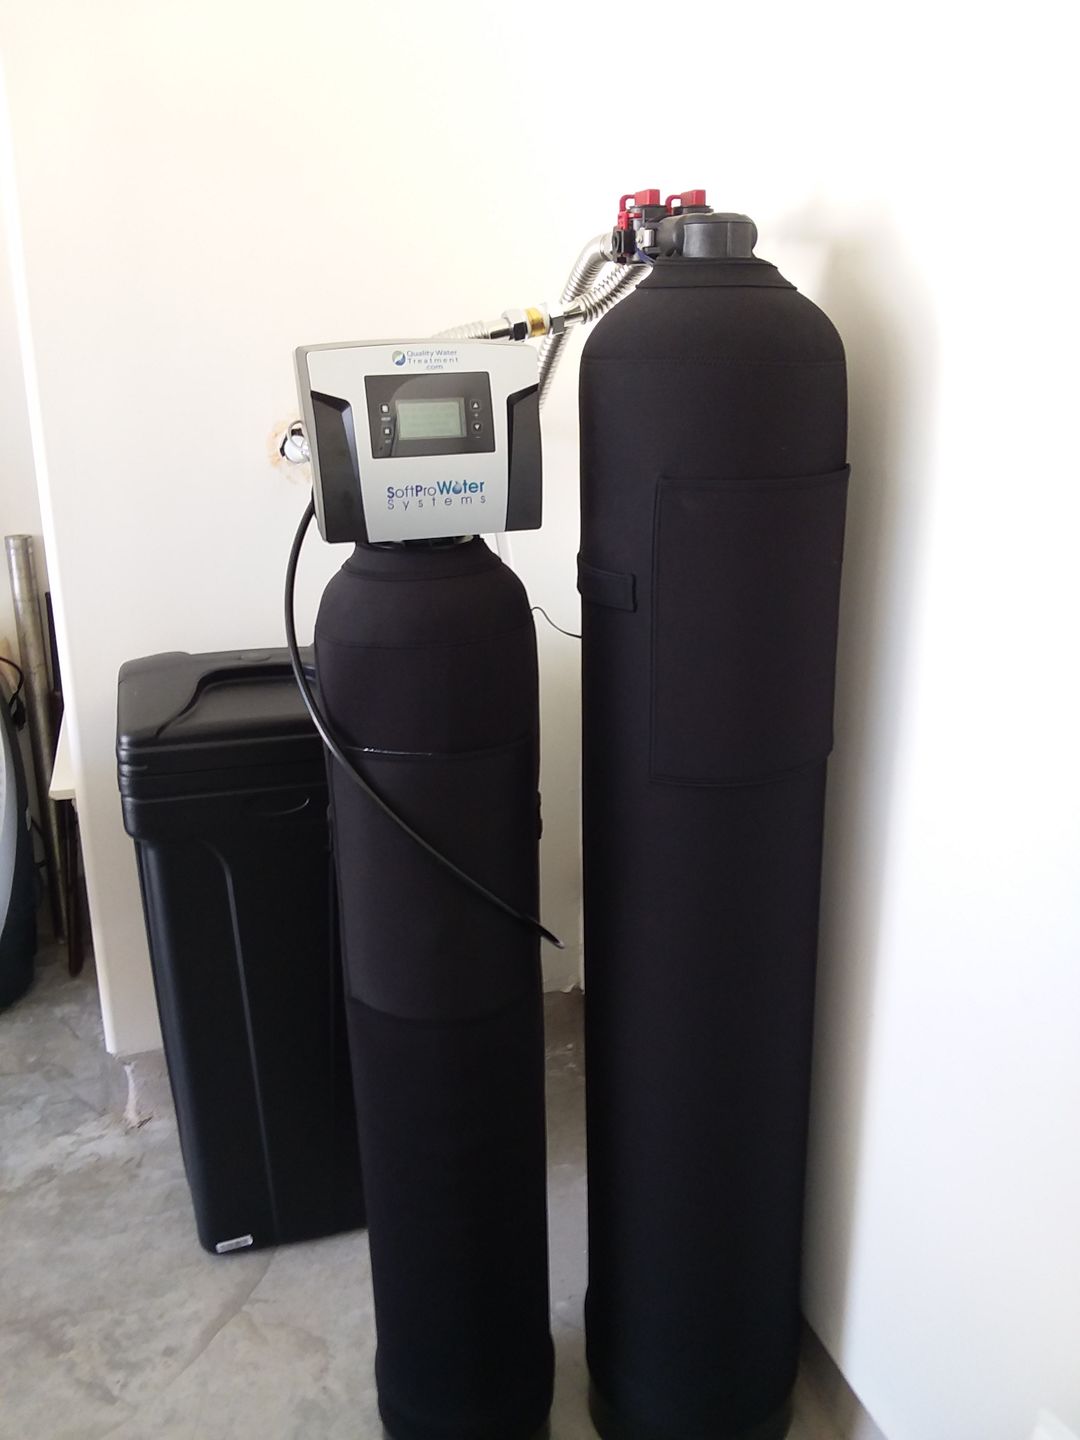 Water Softener Rental Cost Pros And Cons Of Renting Vs Buying